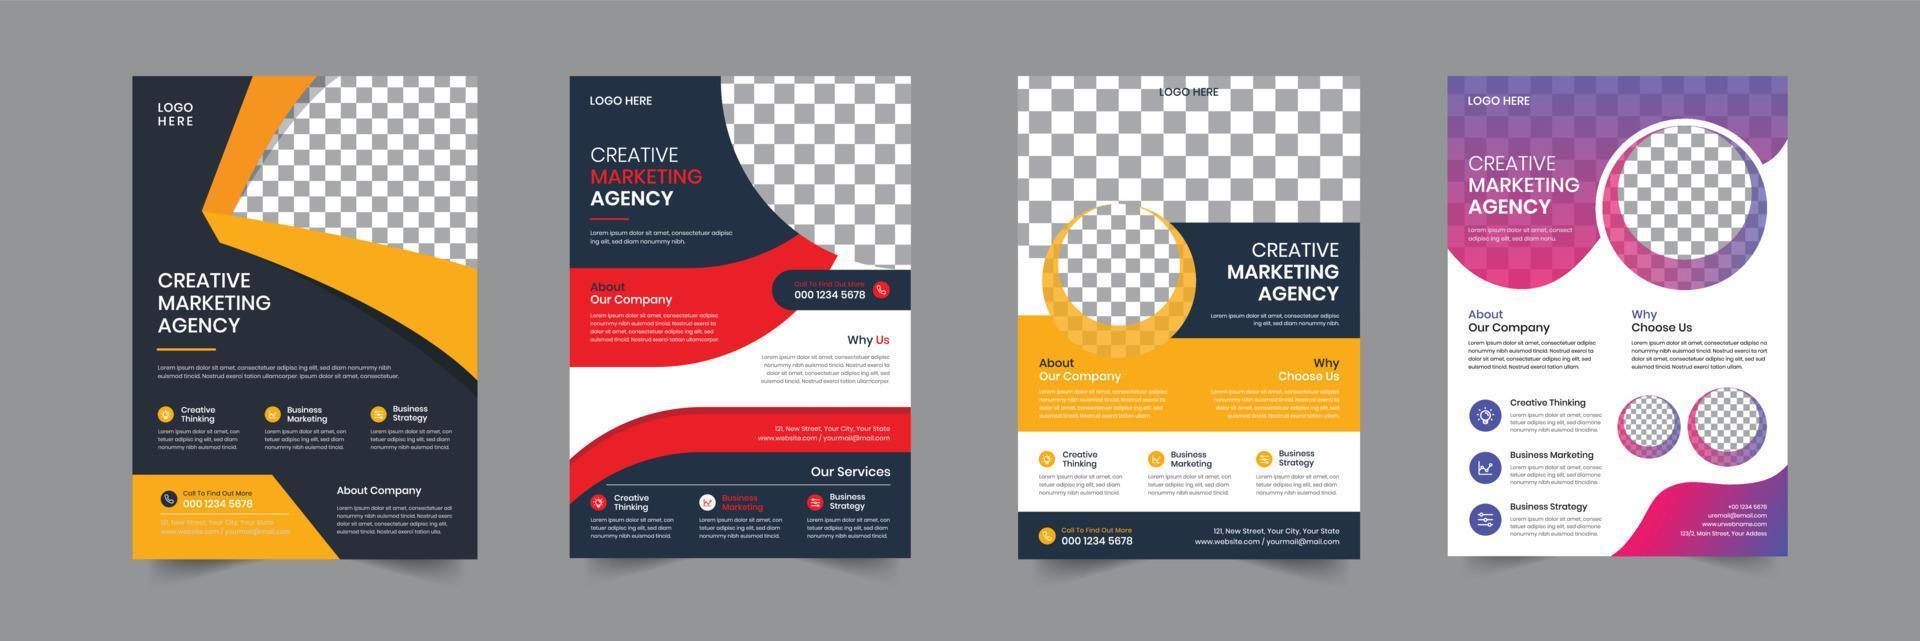 Creative Corporate business flyer template design. 4 Leaflet Brochure poster vector illustrator. For marketing, promotion, business proposal, advertise, Annual Report, book cover, education